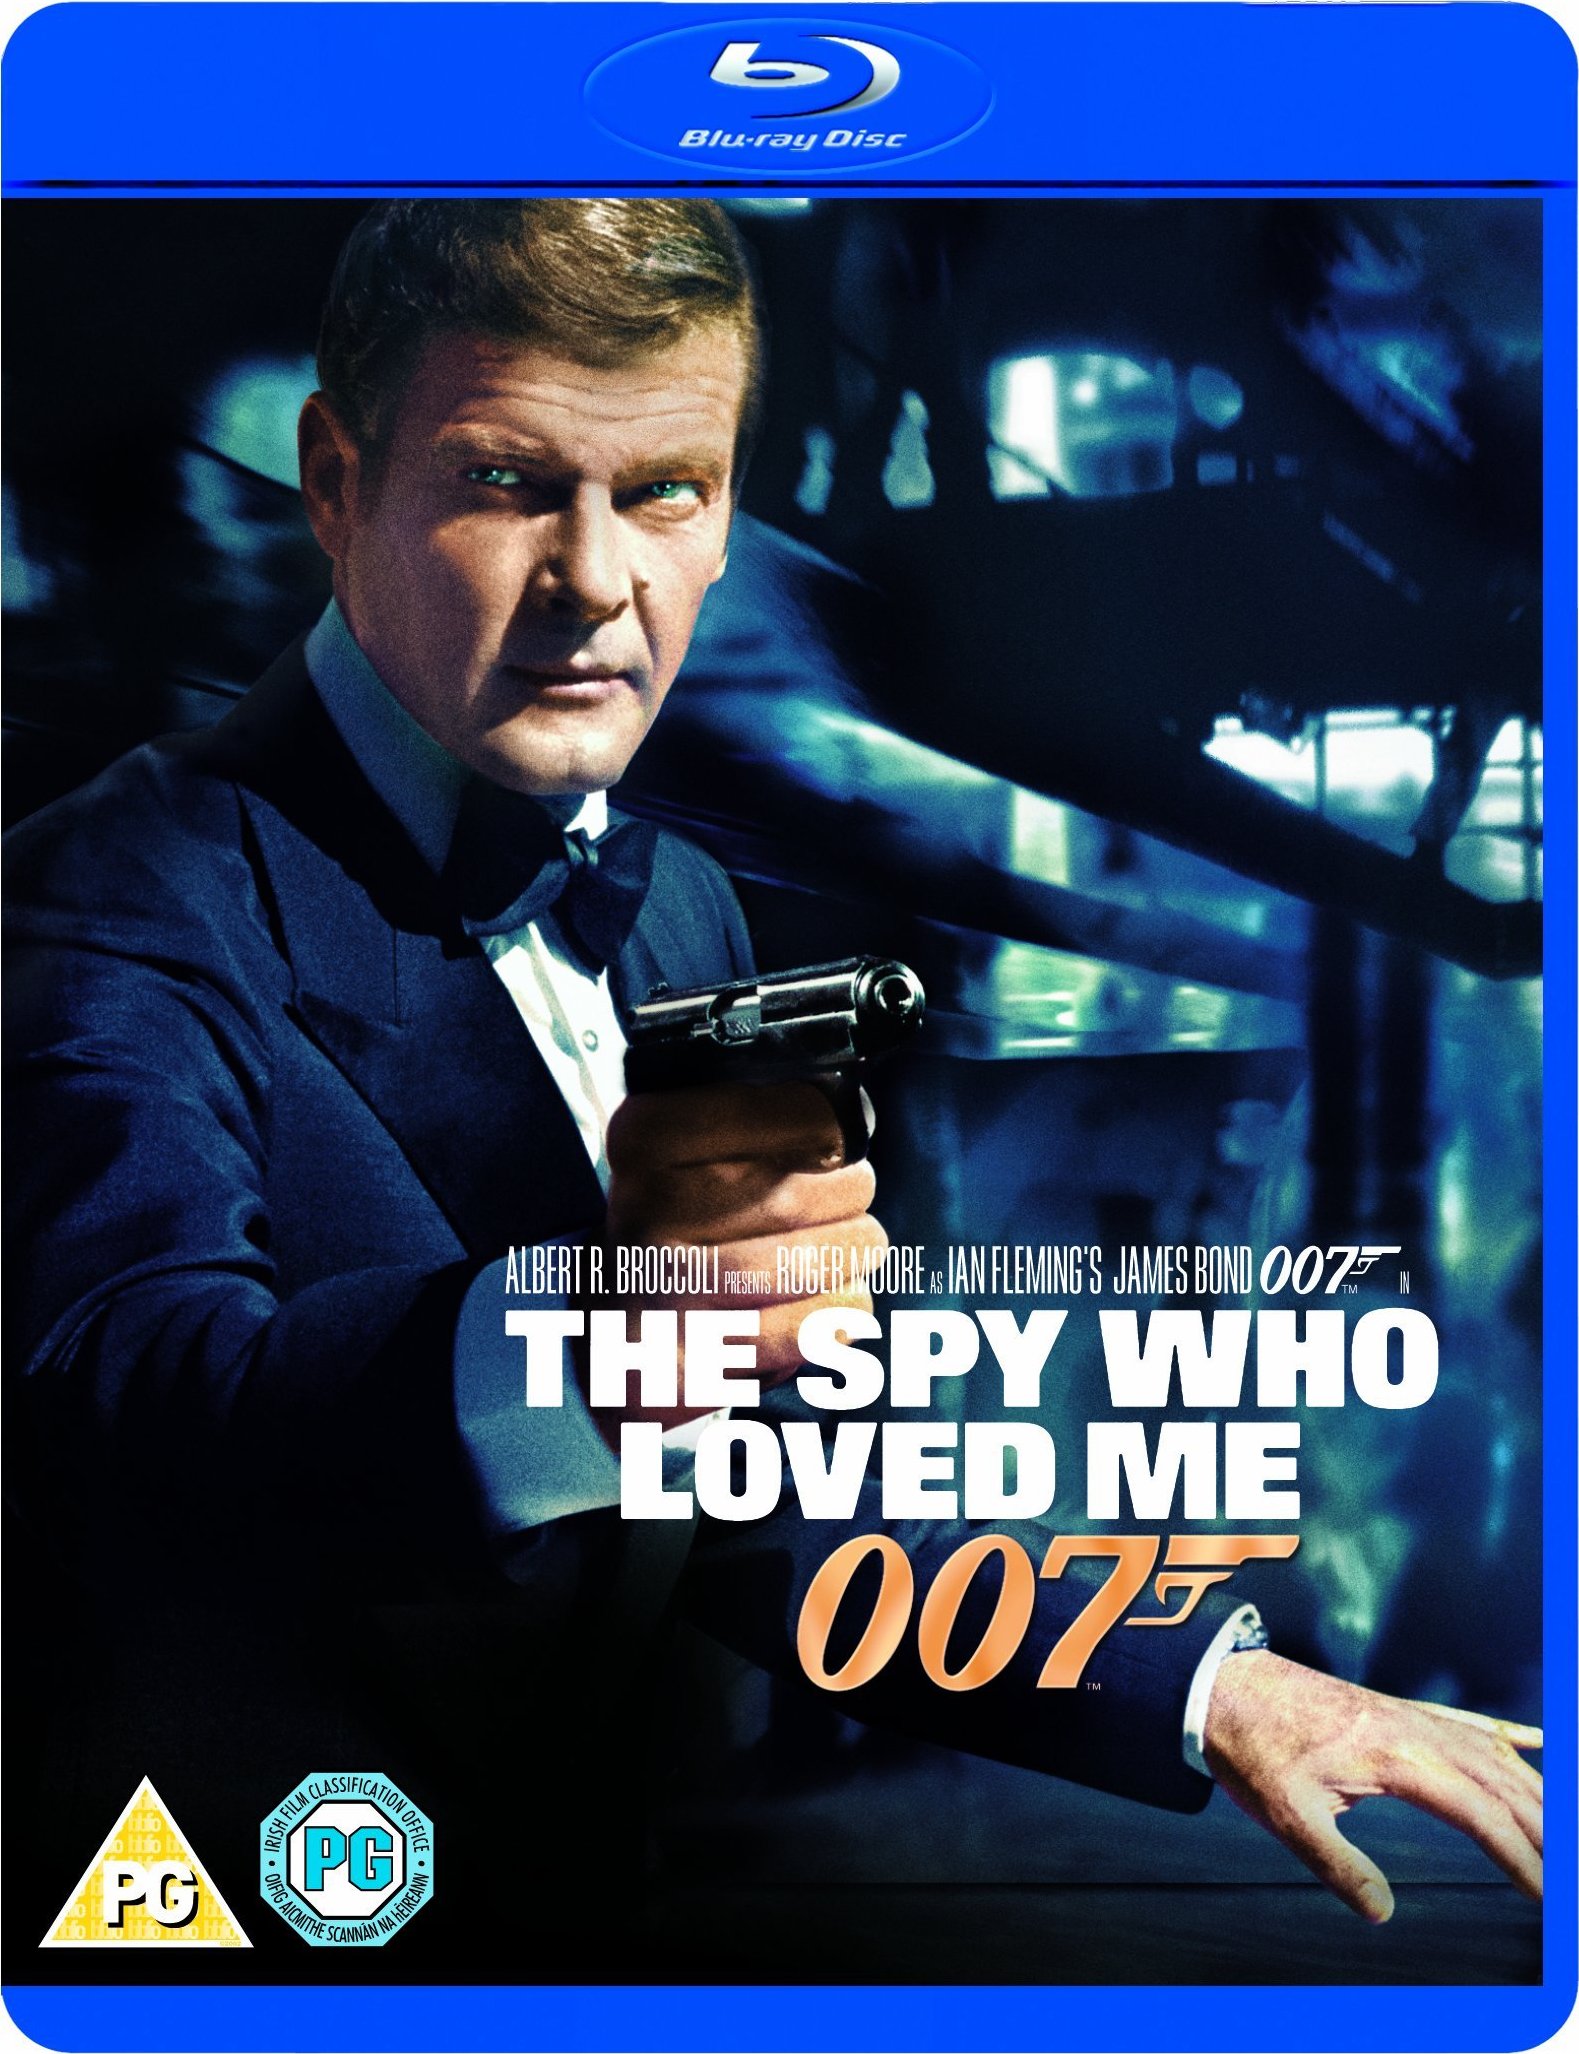 Nice Images Collection: The Spy Who Loved Me Desktop Wallpapers